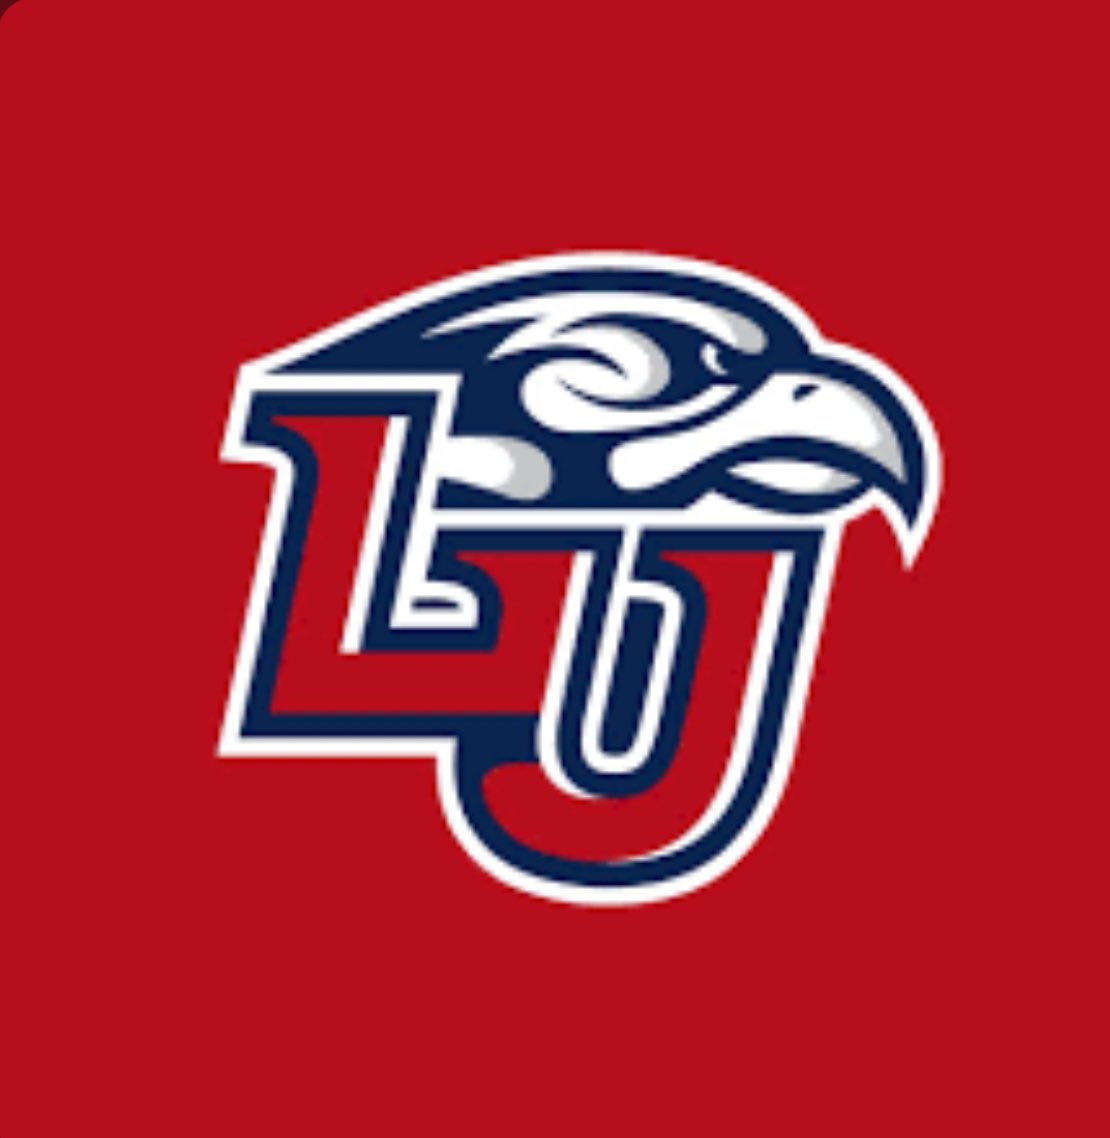 Blessed to receive a division one offer from Liberty University @LibertyFootball @acoachingrev @BillLiedy @CoachDrew__ @football_cghsnc @Tony_TDUB